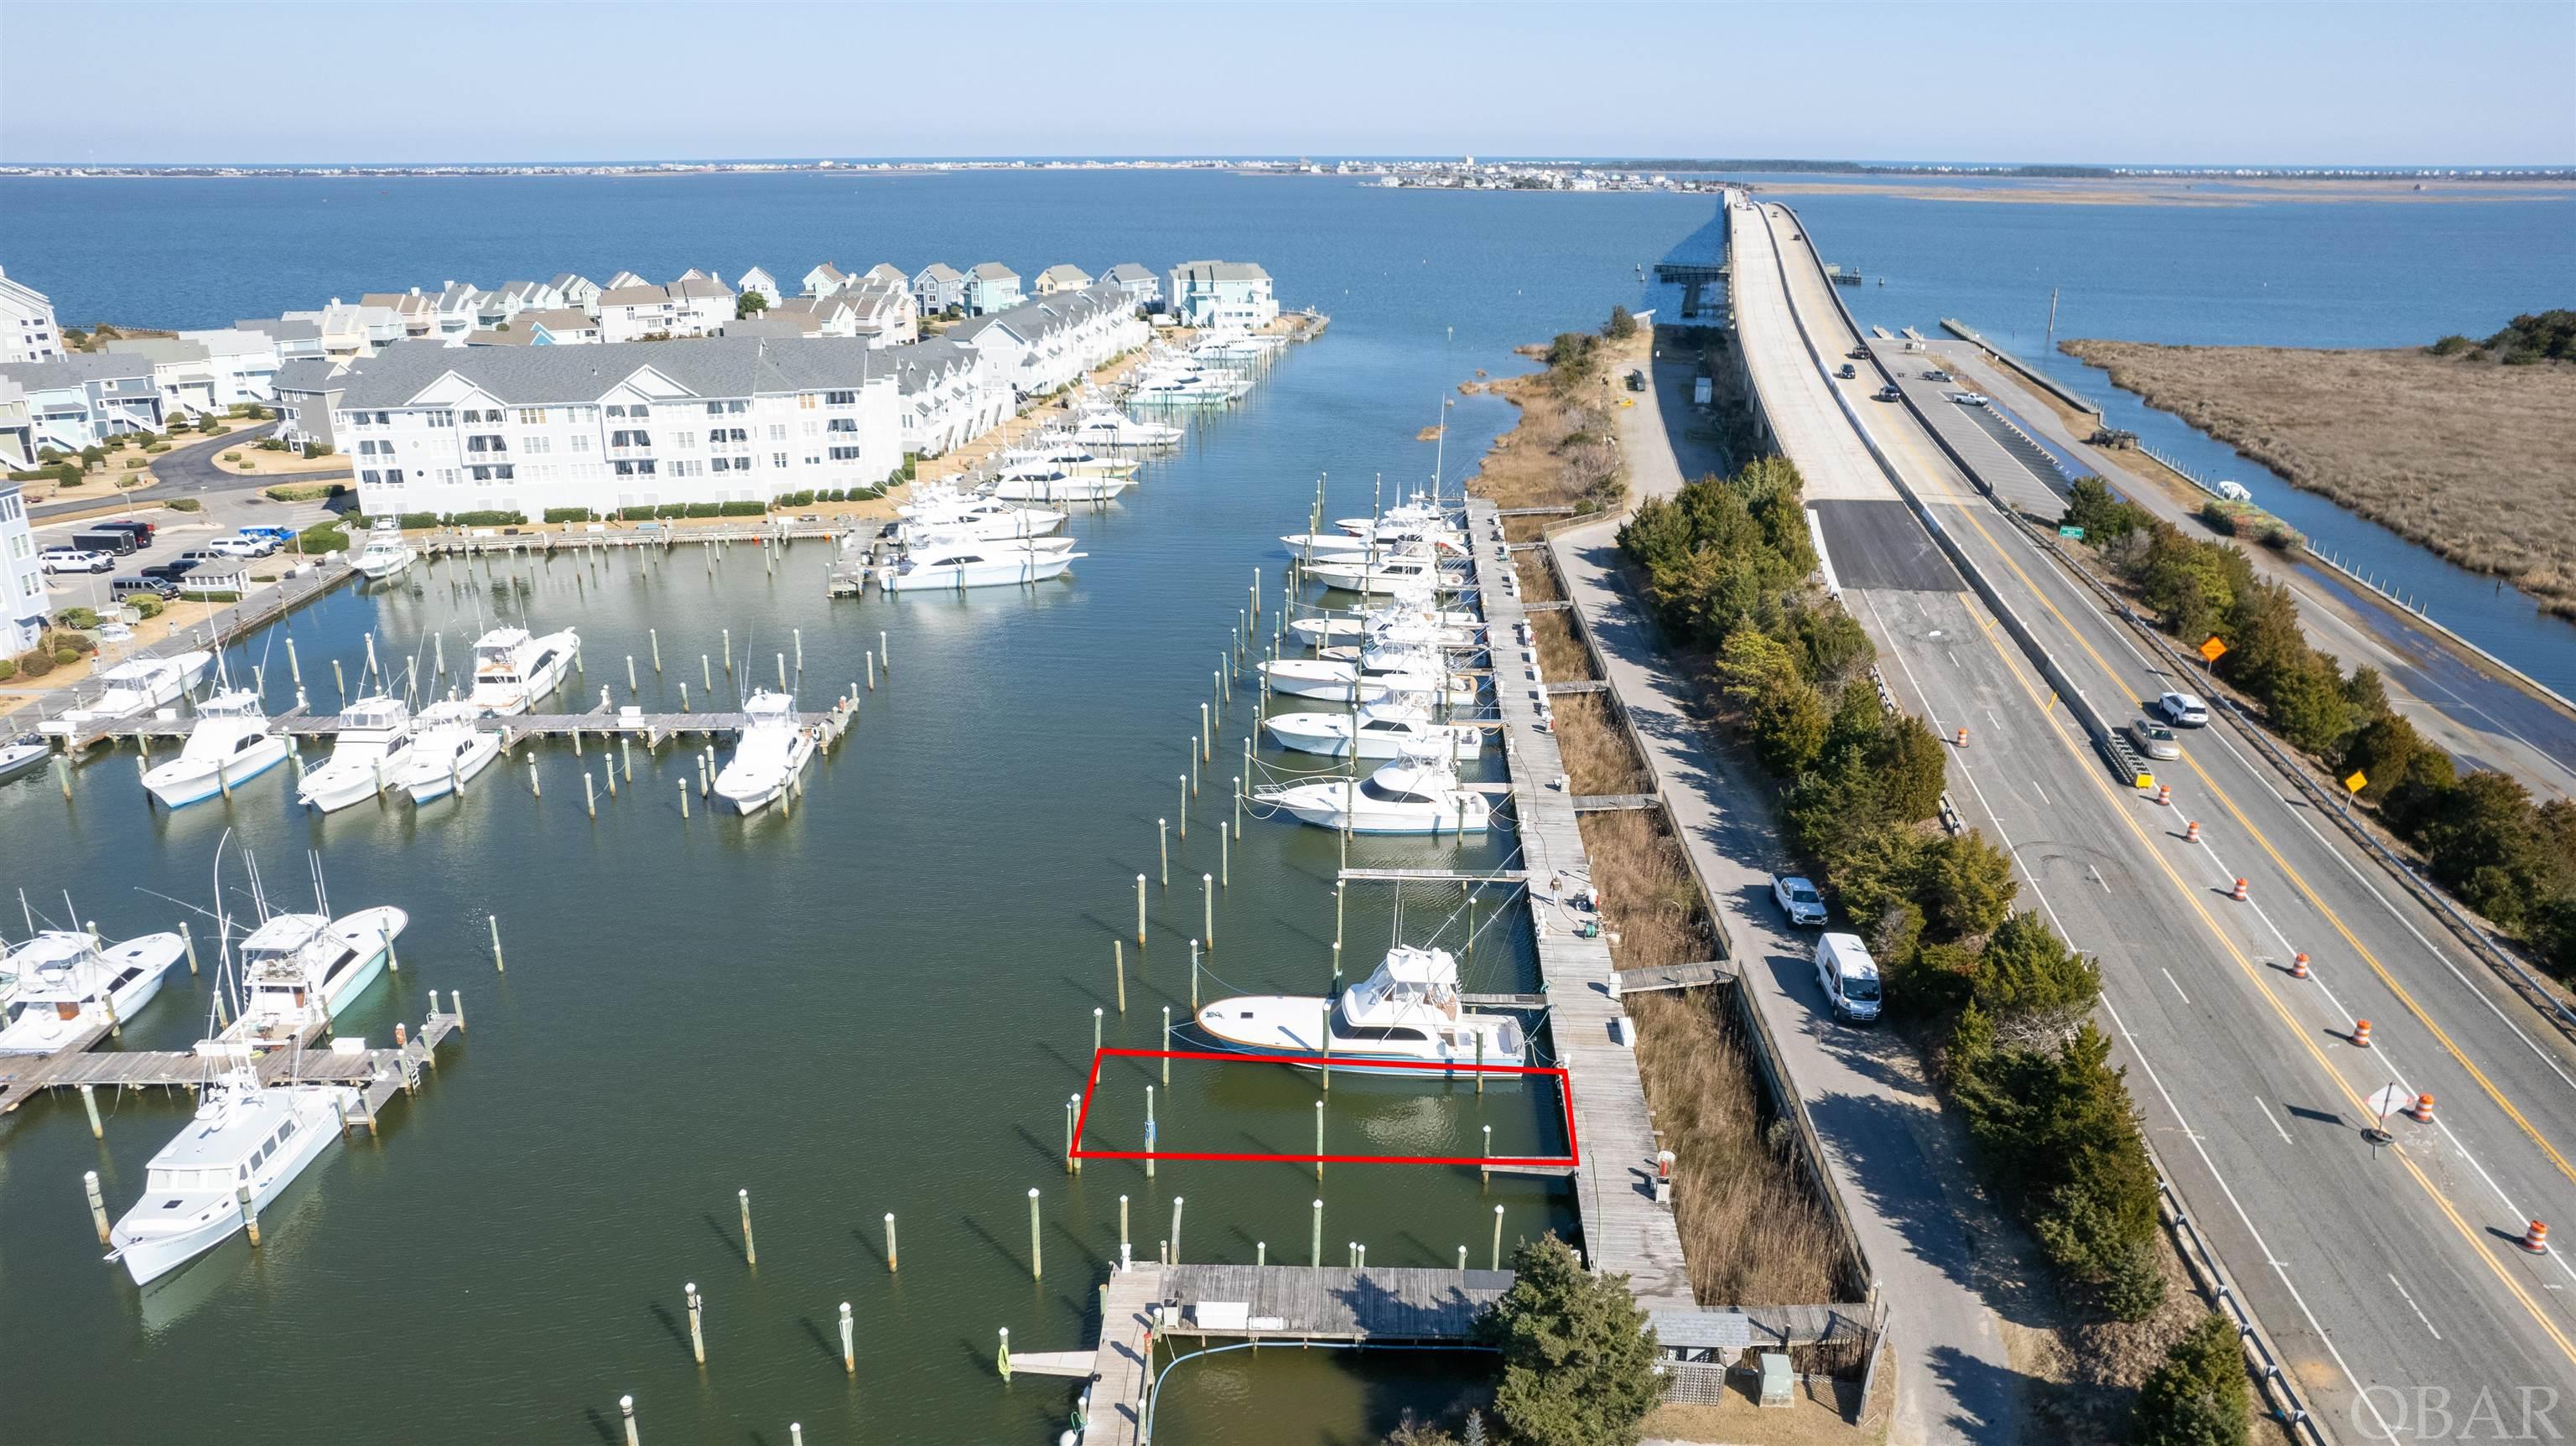 5 Yacht Club Court, Manteo, NC 27954, ,Lots/land,For sale,Yacht Club Court,124692